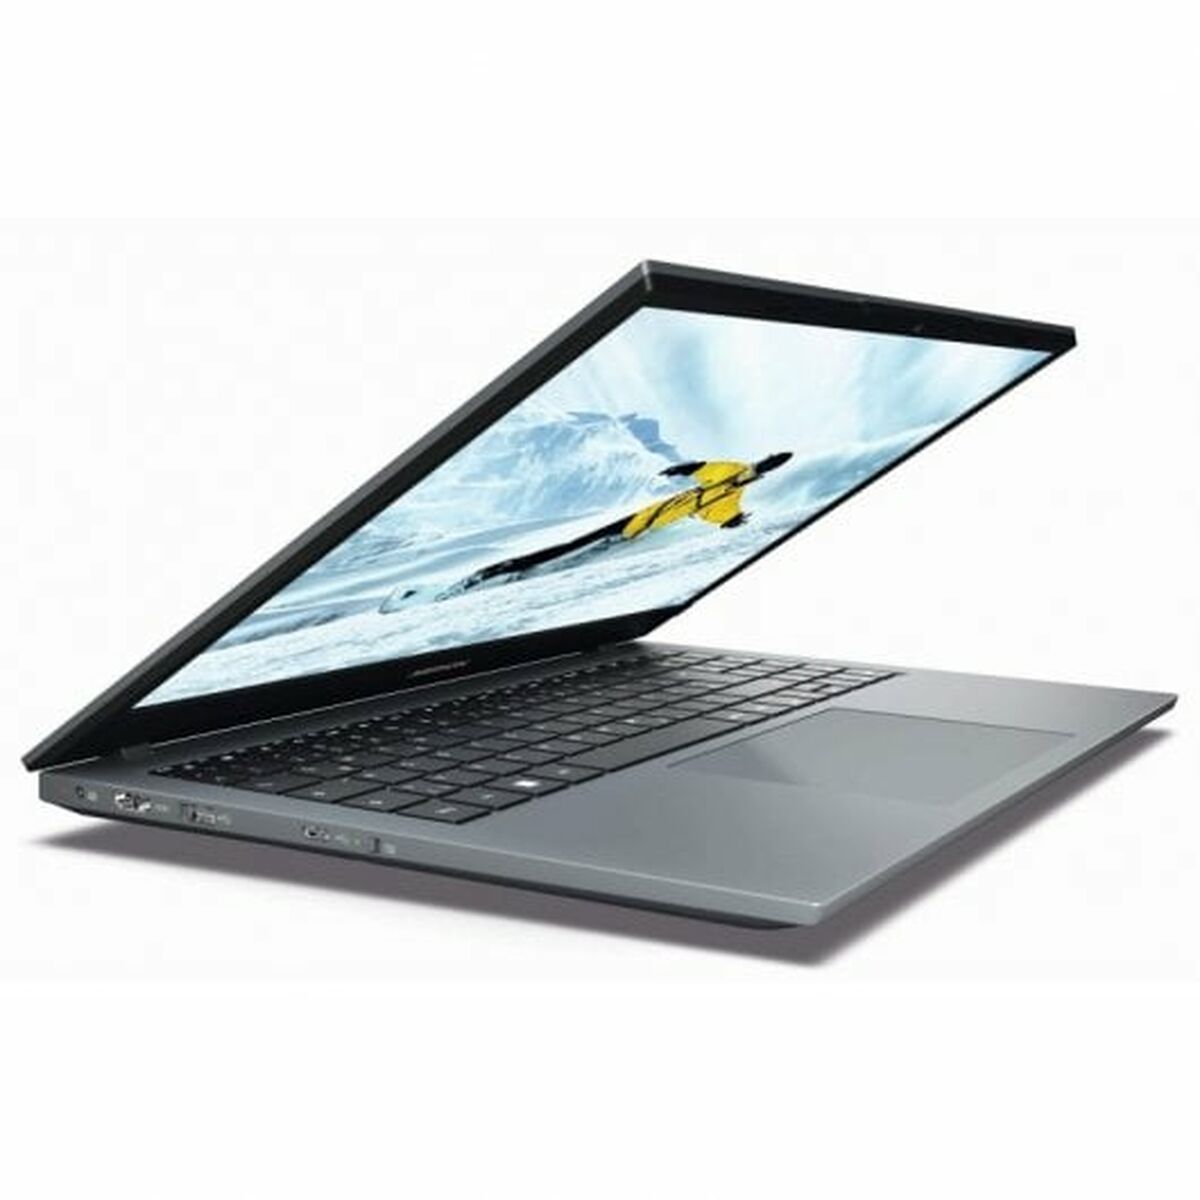 Laptop Medion Akoya E15423 MD62562 15,6" I5-1155G7 16 GB RAM 512 GB SSD, Medion, Computing, notebook-medion-akoya-e15423-md62562-i5-1155g7-16-gb-ram-15-6-512-gb-ssd, :512 GB, :Intel, :Intel-i5, :QWERTY, :RAM 16 GB, Brand_Medion, category-reference-2609, category-reference-2791, category-reference-2797, category-reference-t-19685, category-reference-t-19904, Condition_NEW, office, Price_400 - 500, Teleworking, RiotNook